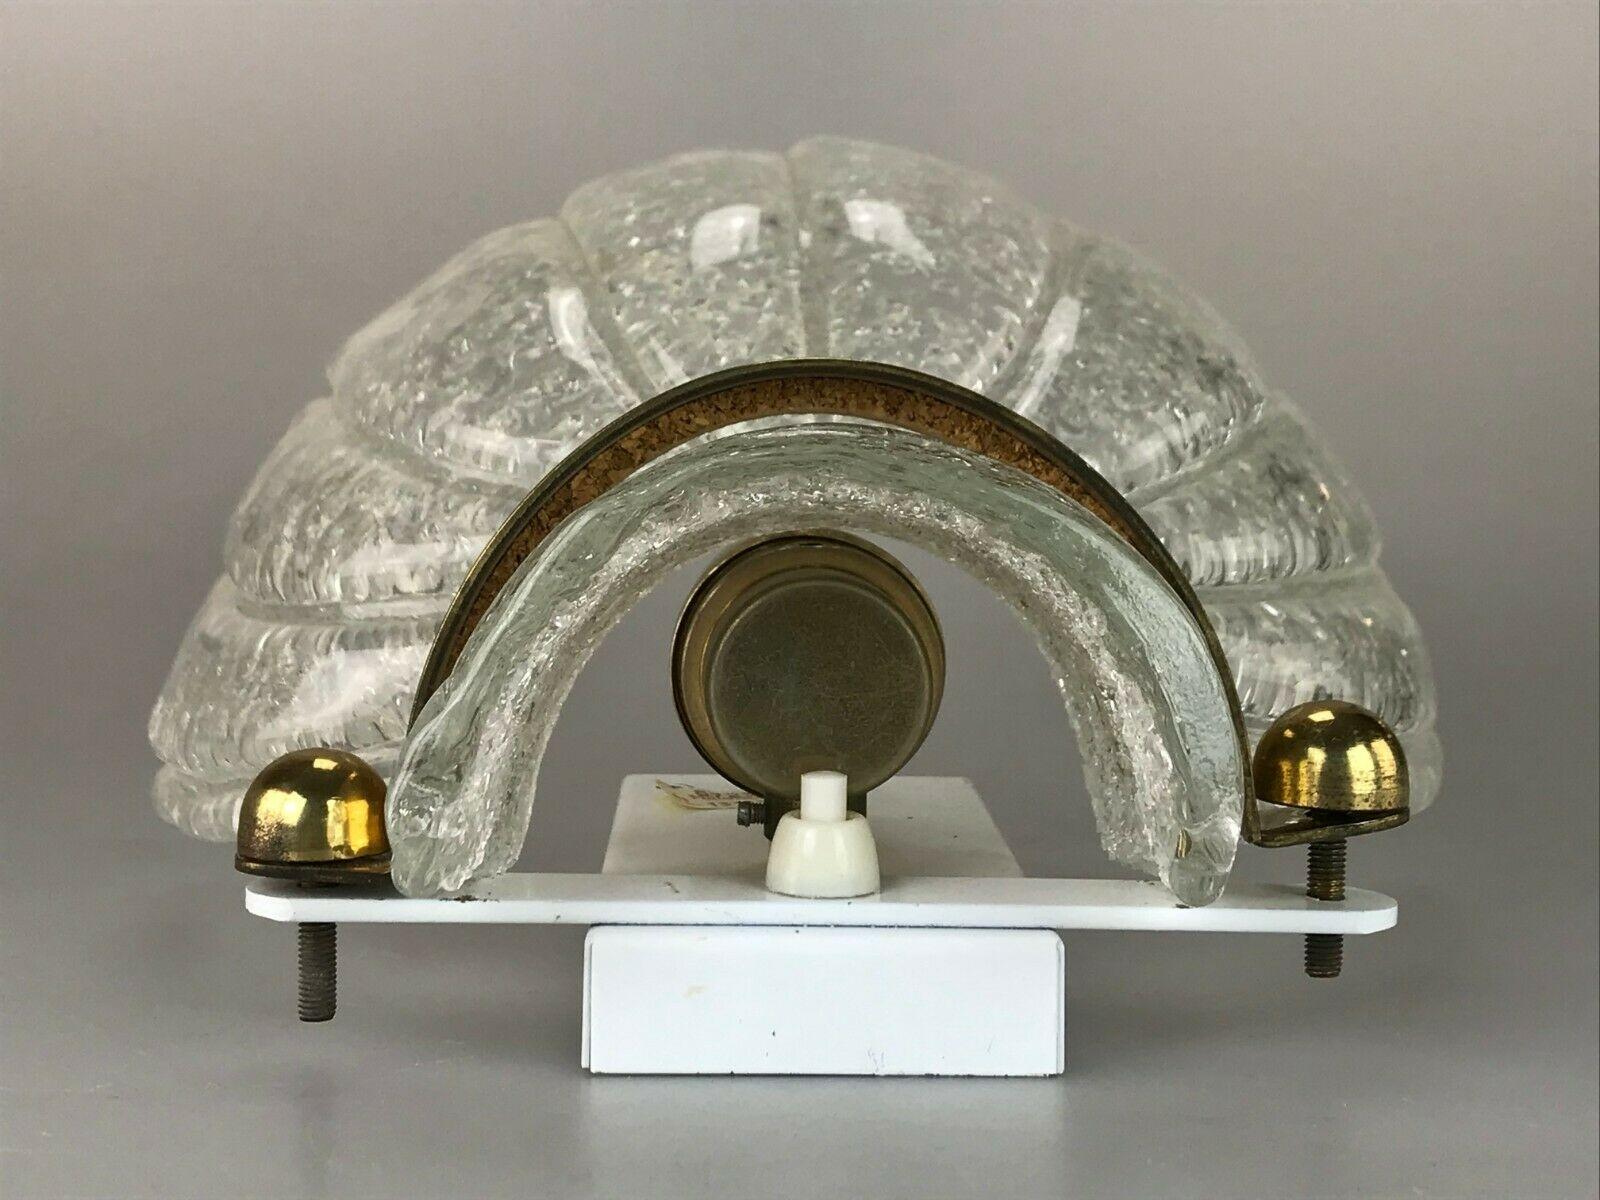 60s 70s Lamp Fixture Wall Sconce Wall Lamp Hillebrand Space Age Design 1